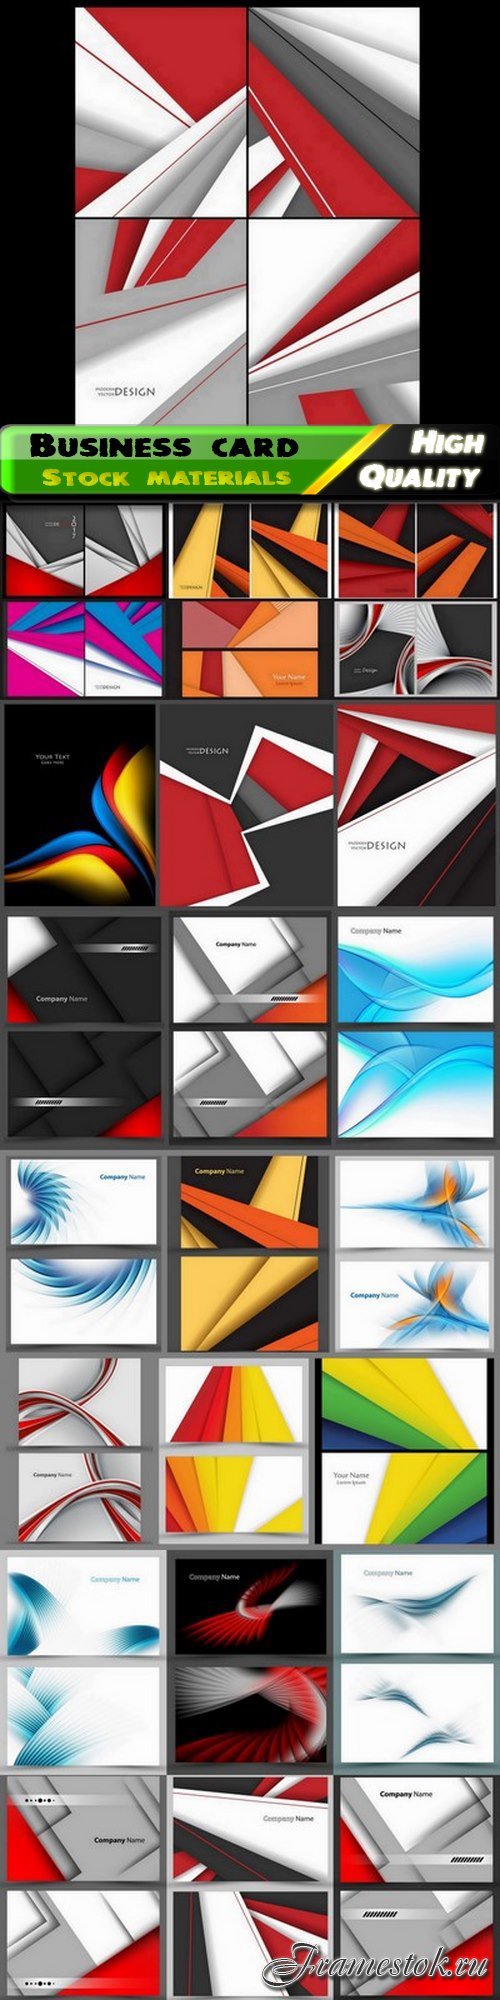 Business card with front and back side and abstract background 25 Eps